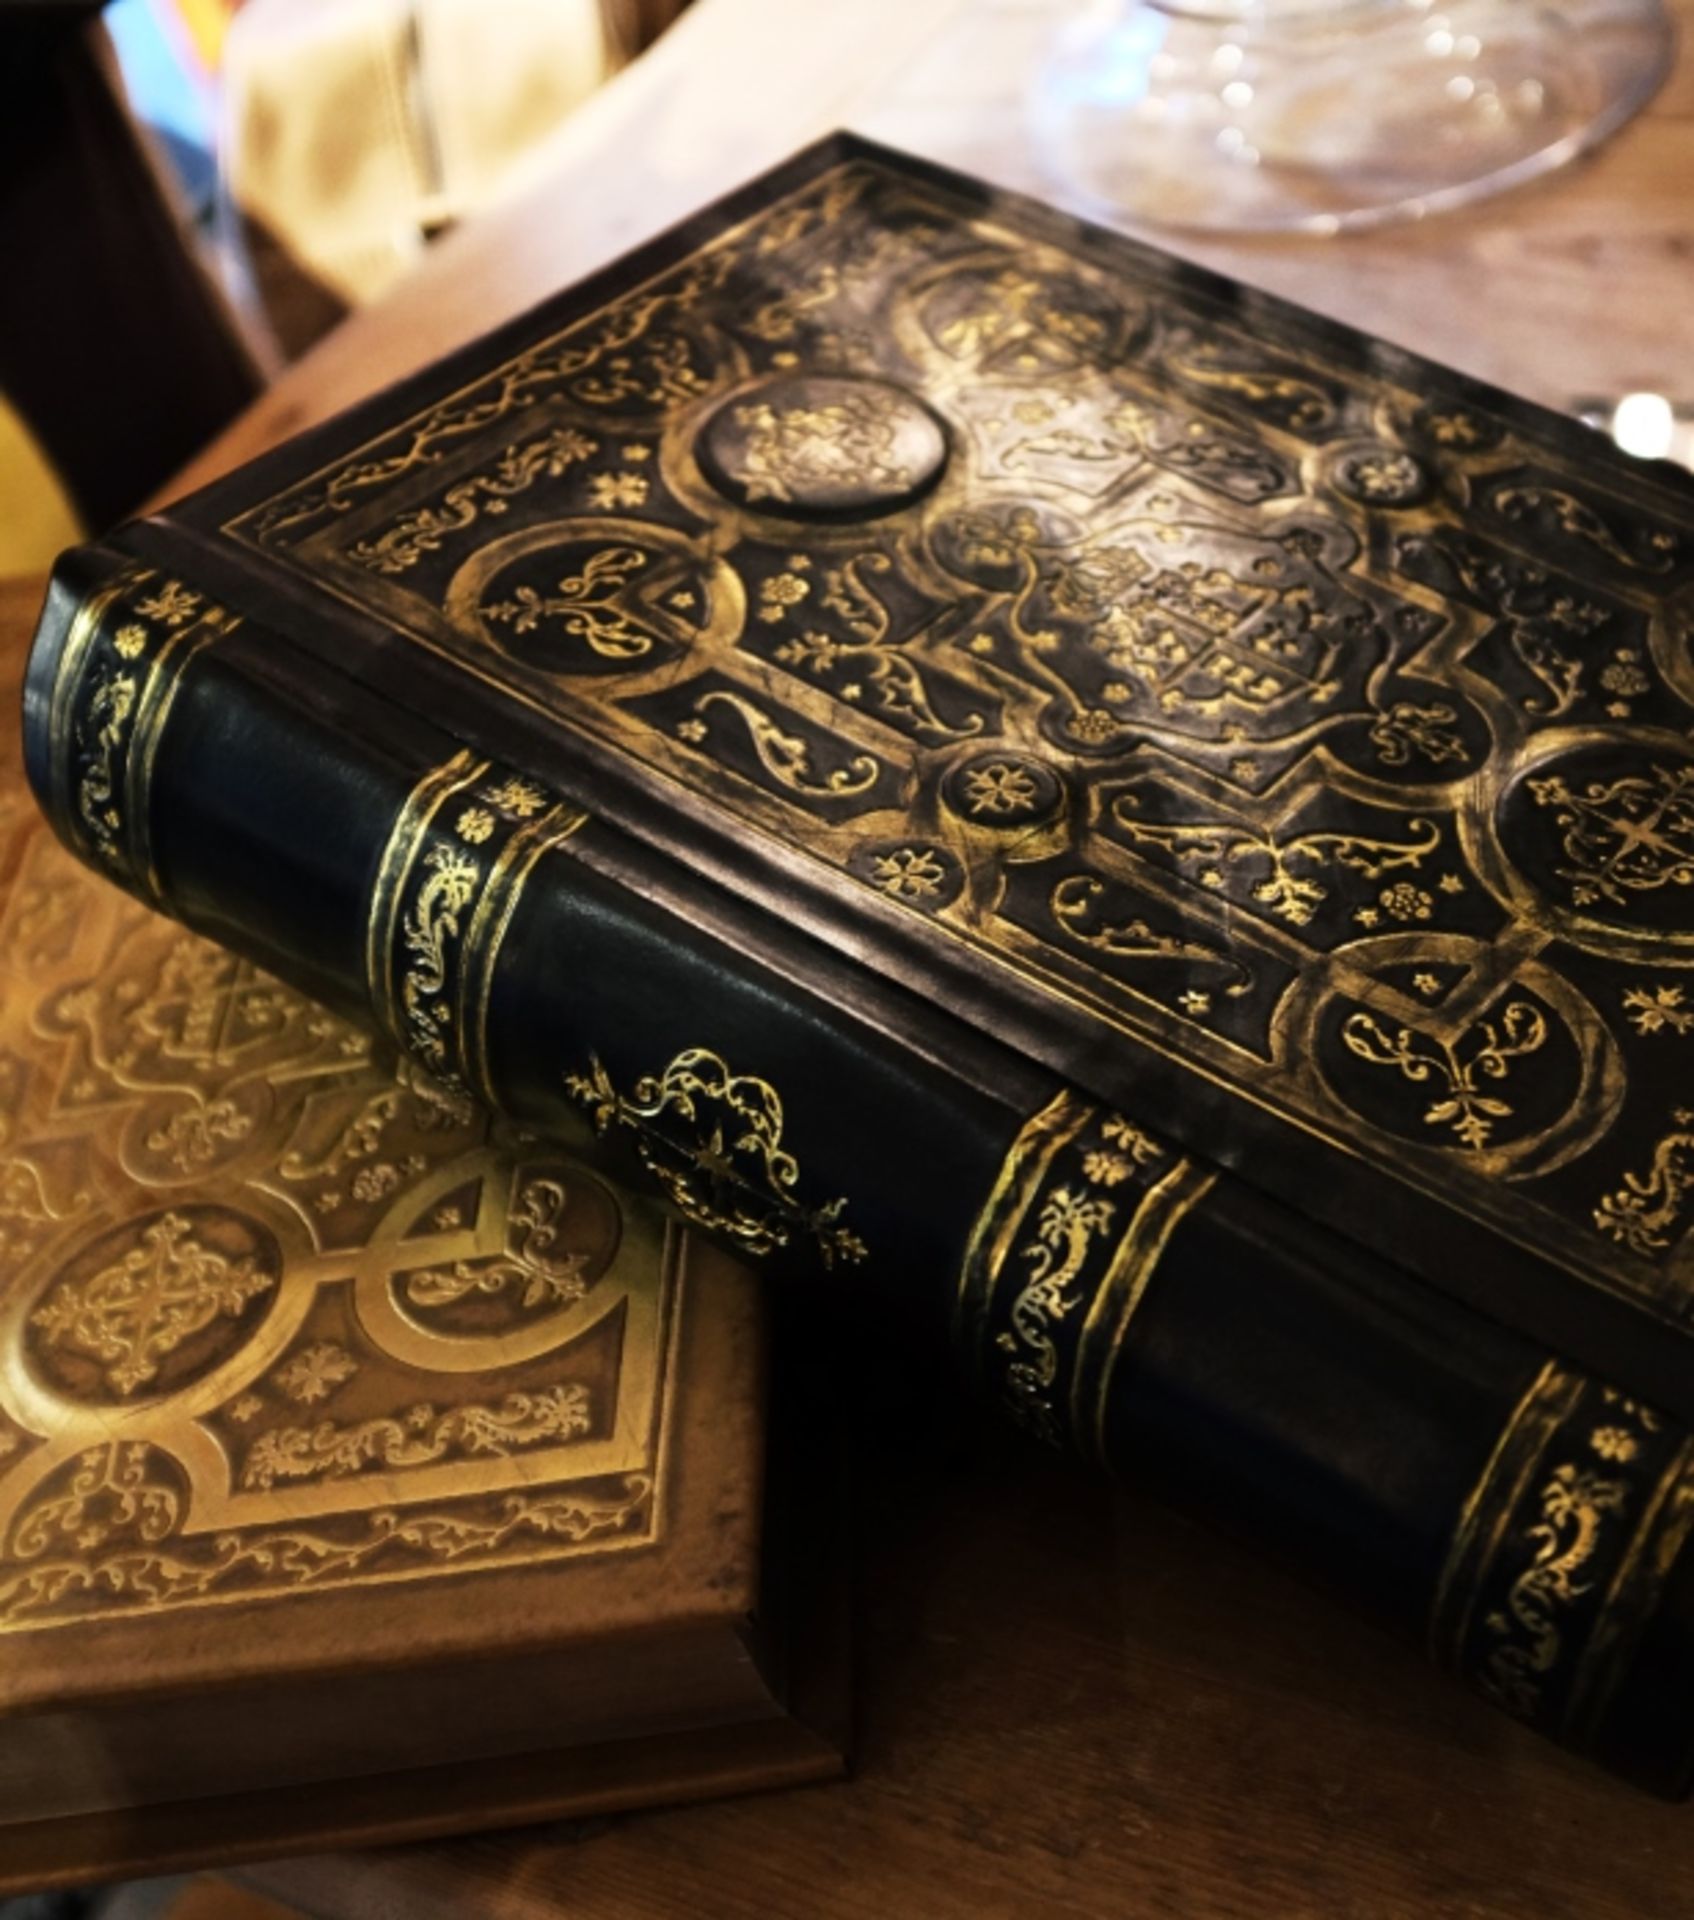 Comments Book Old Saddle Black Leather Bound Inspired by the library of historic Blenheim Palace,